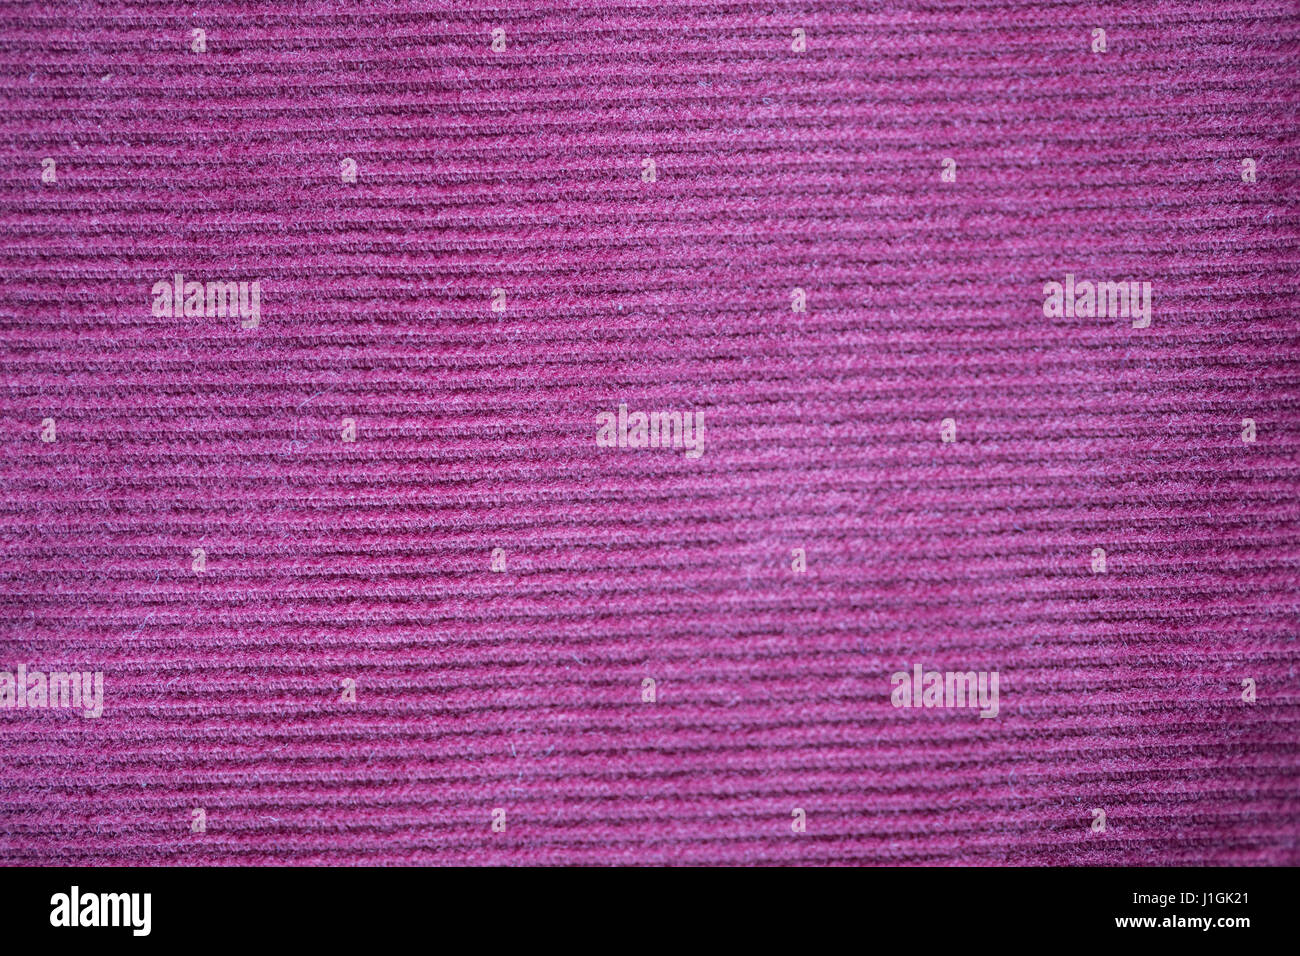 close up of purple textile or fabric background Stock Photo